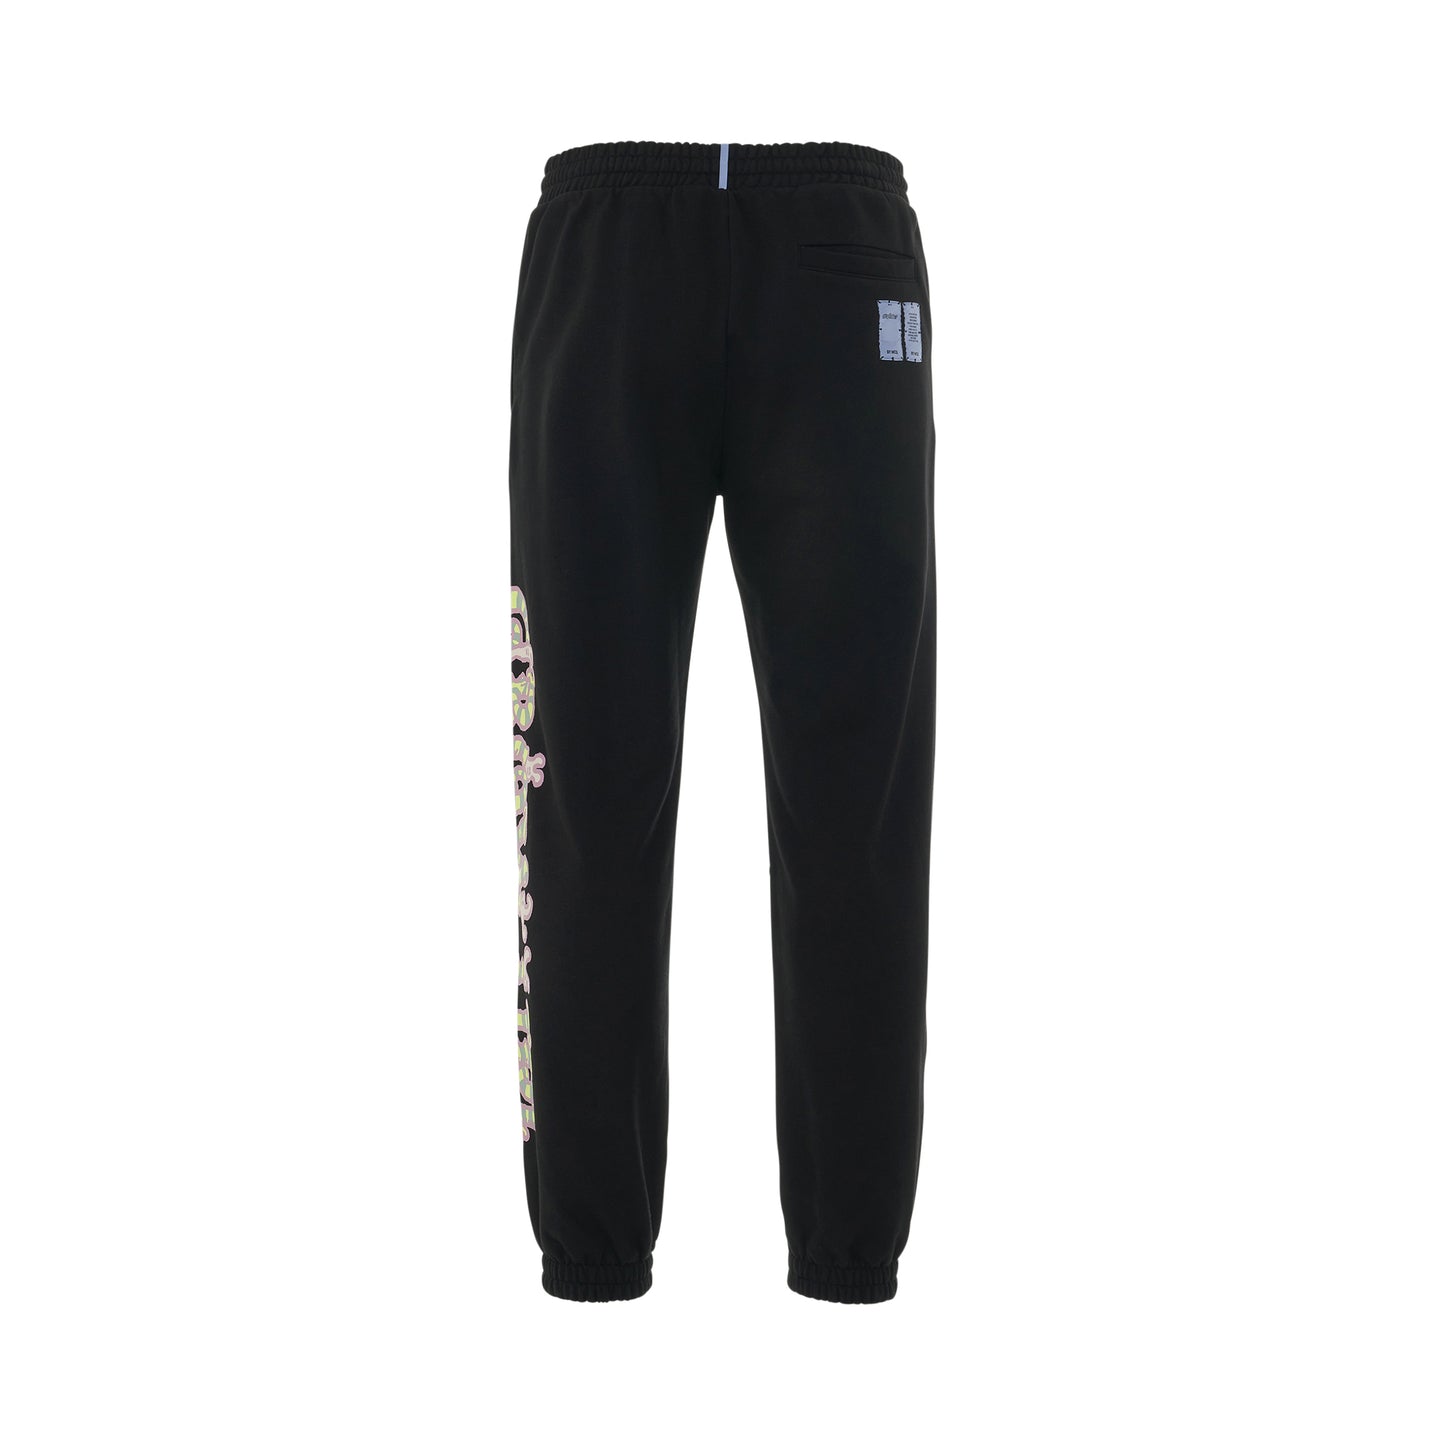 Forest Party Dart Print Sweatpants in Black